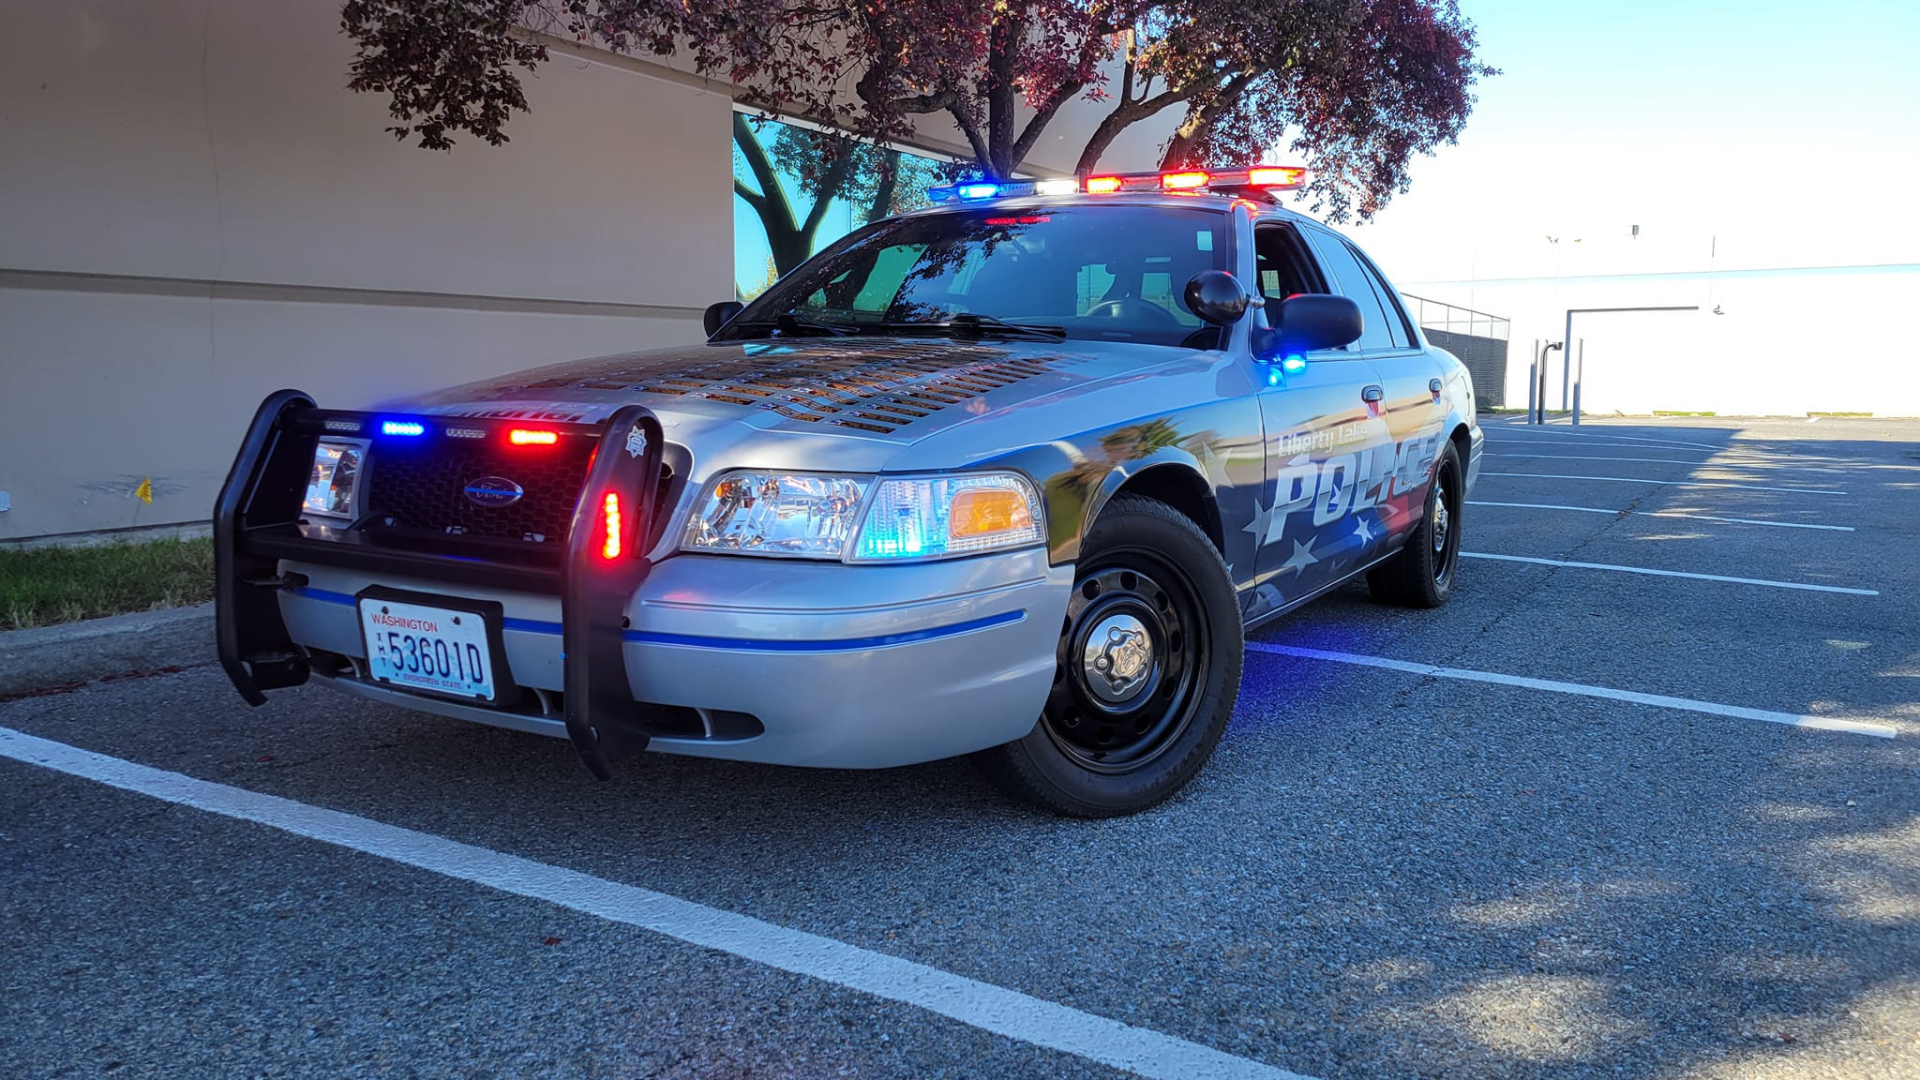 Close-up view of a Liberty Lake Police patrol car with flashing red and blue lights, showing a hood filled with police memorial plaques in daylight.